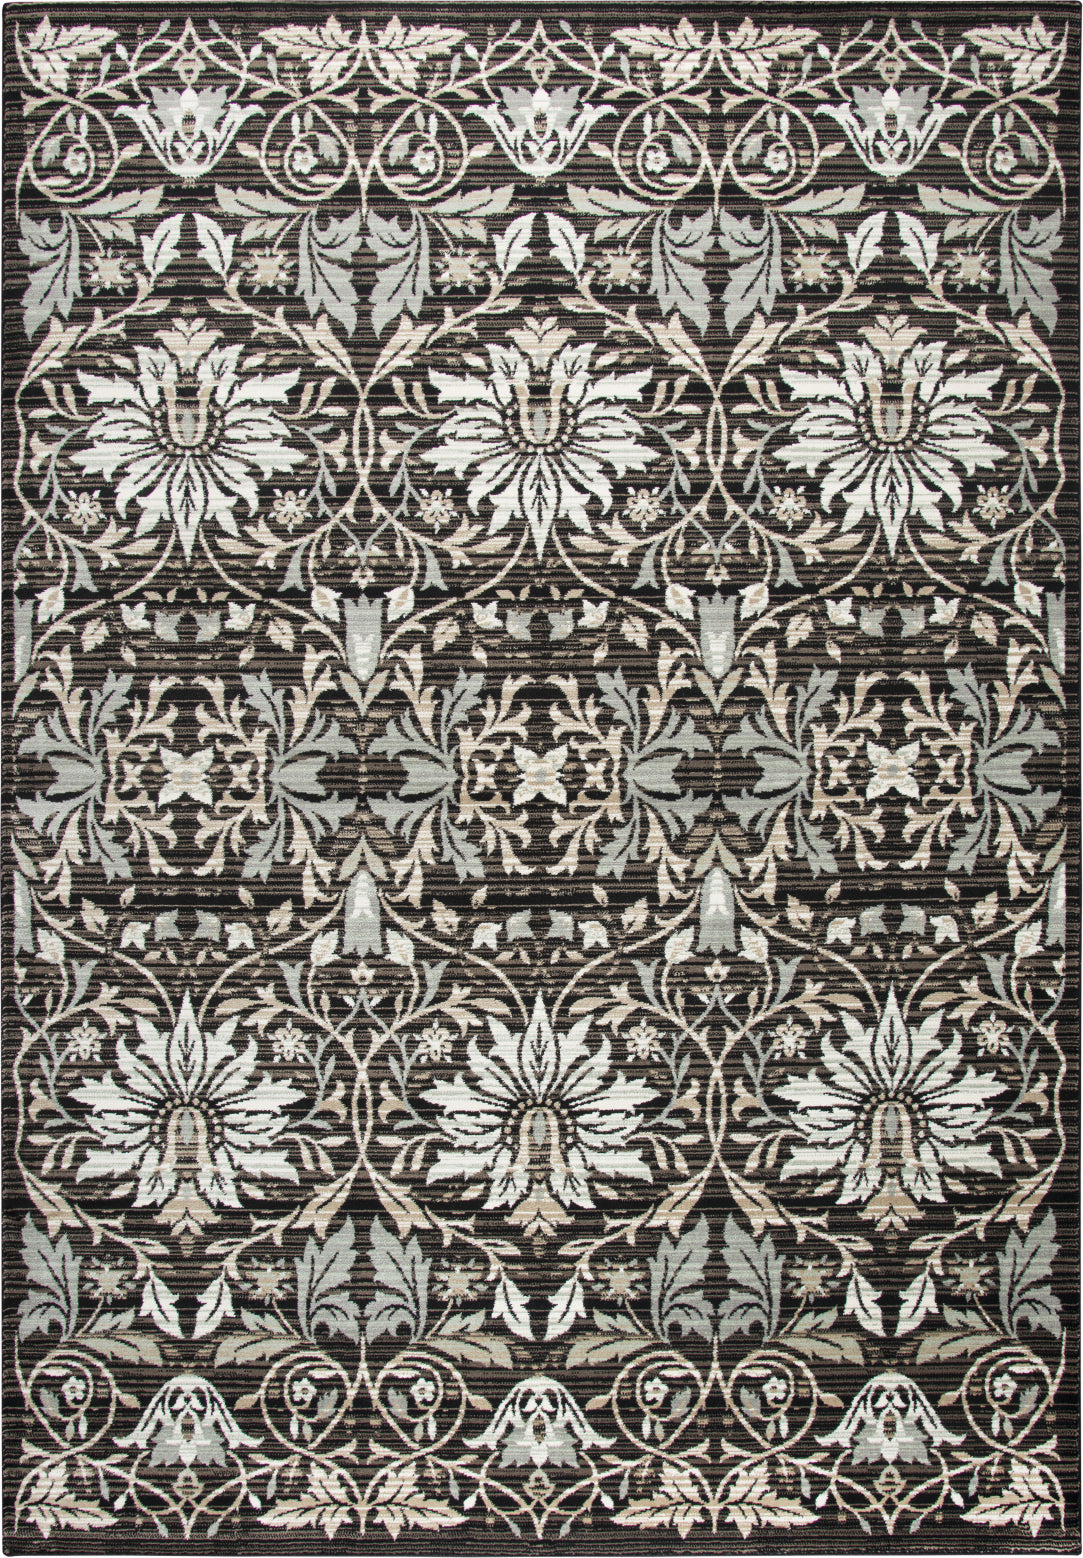 Rizzy Zenith ZH7083 Black Area Rug main image